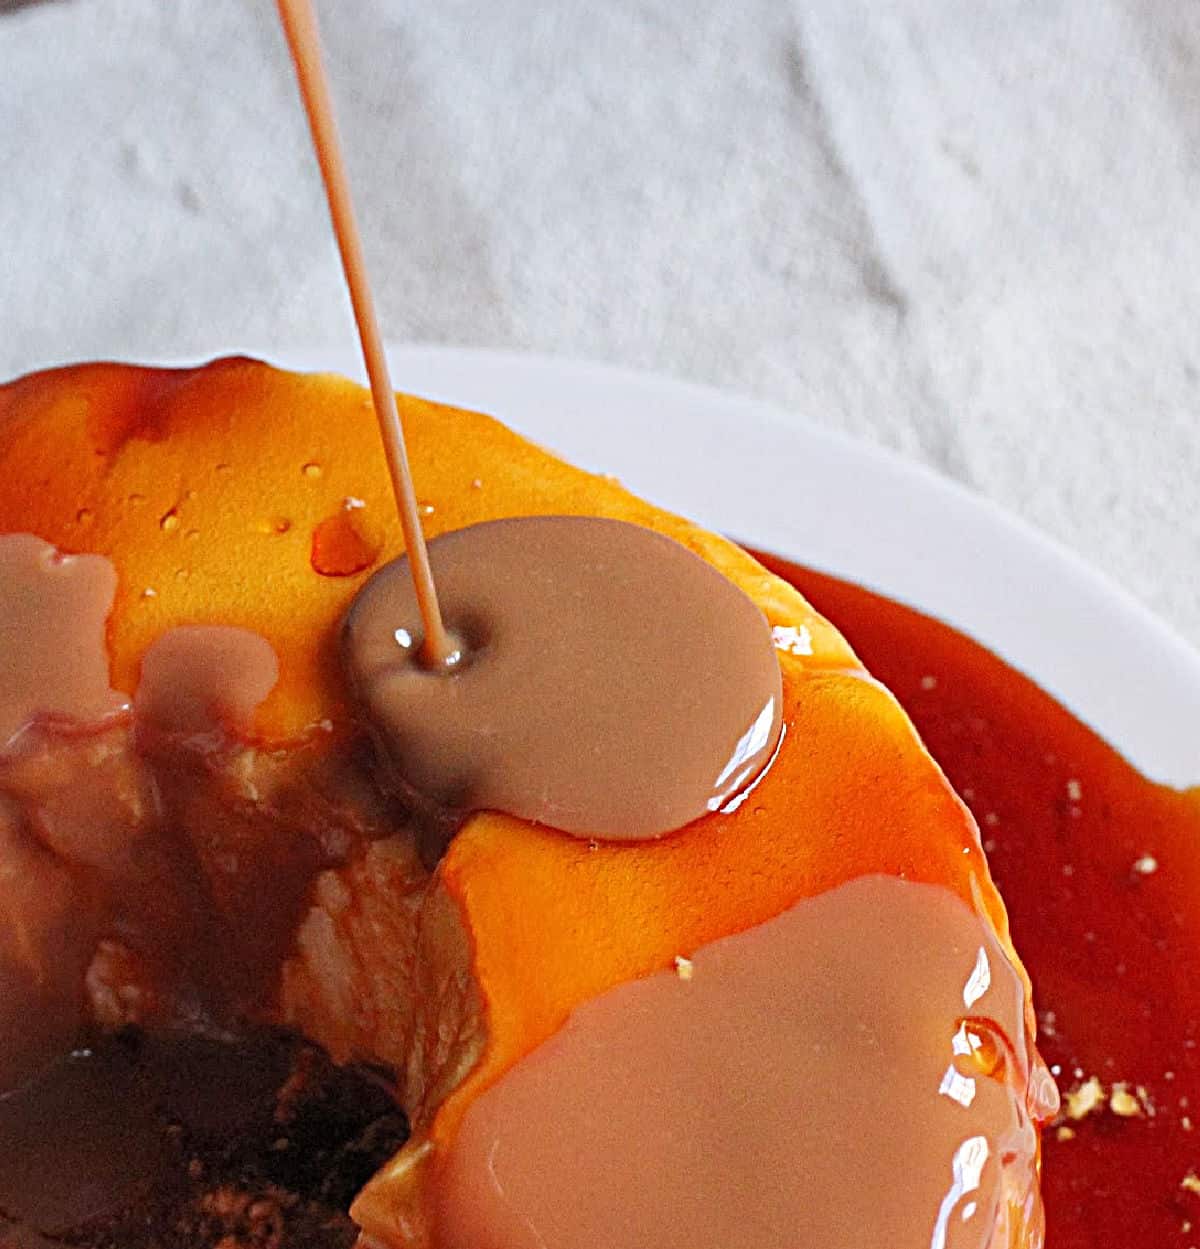 Pouring dulce de leche sauce on caramel floating island dessert; whitish cloth underneath.